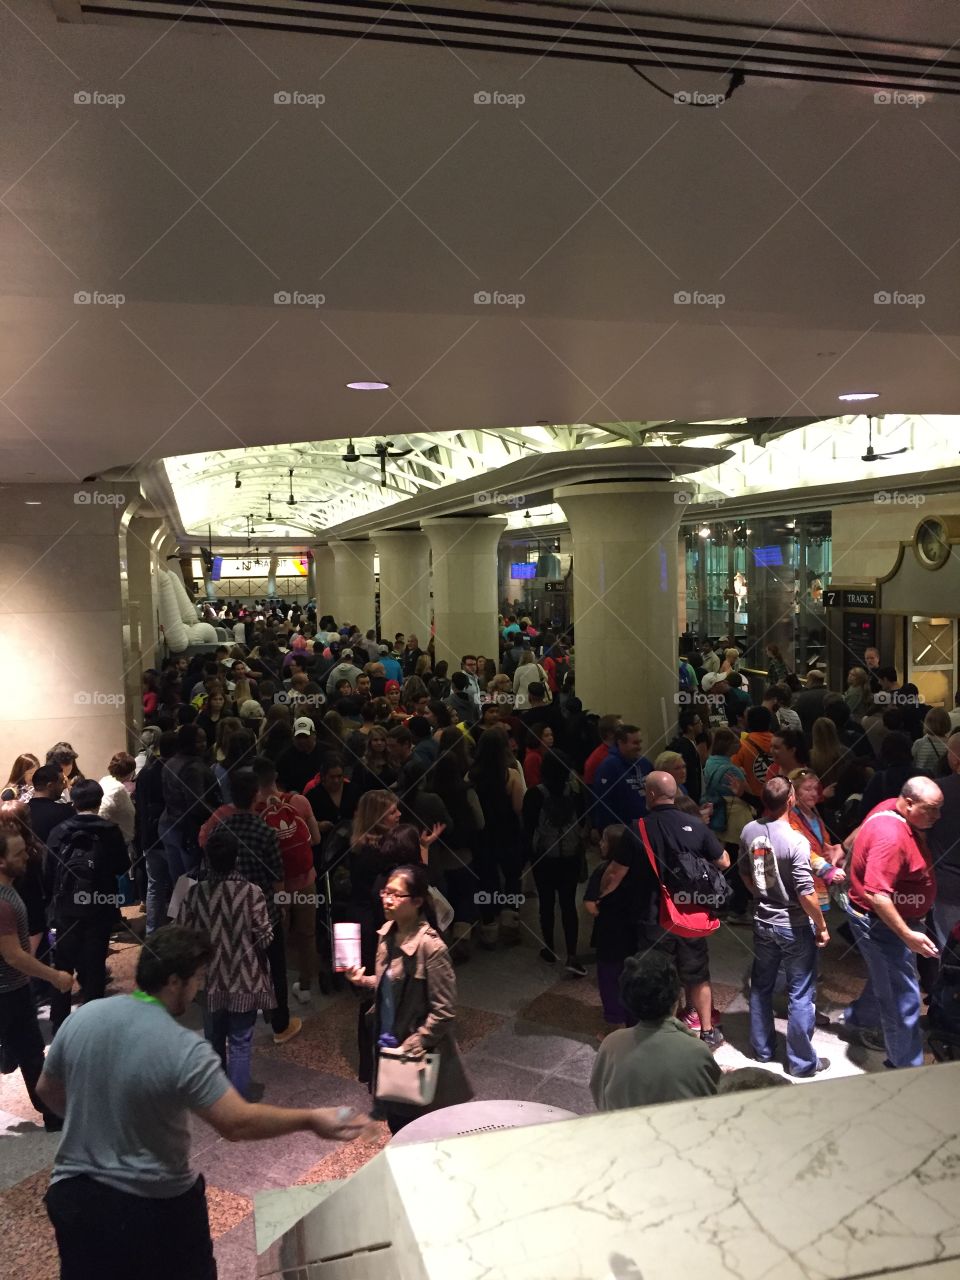 Train delays at a New Jersey transit station create a backlog of commuters in the lobby.